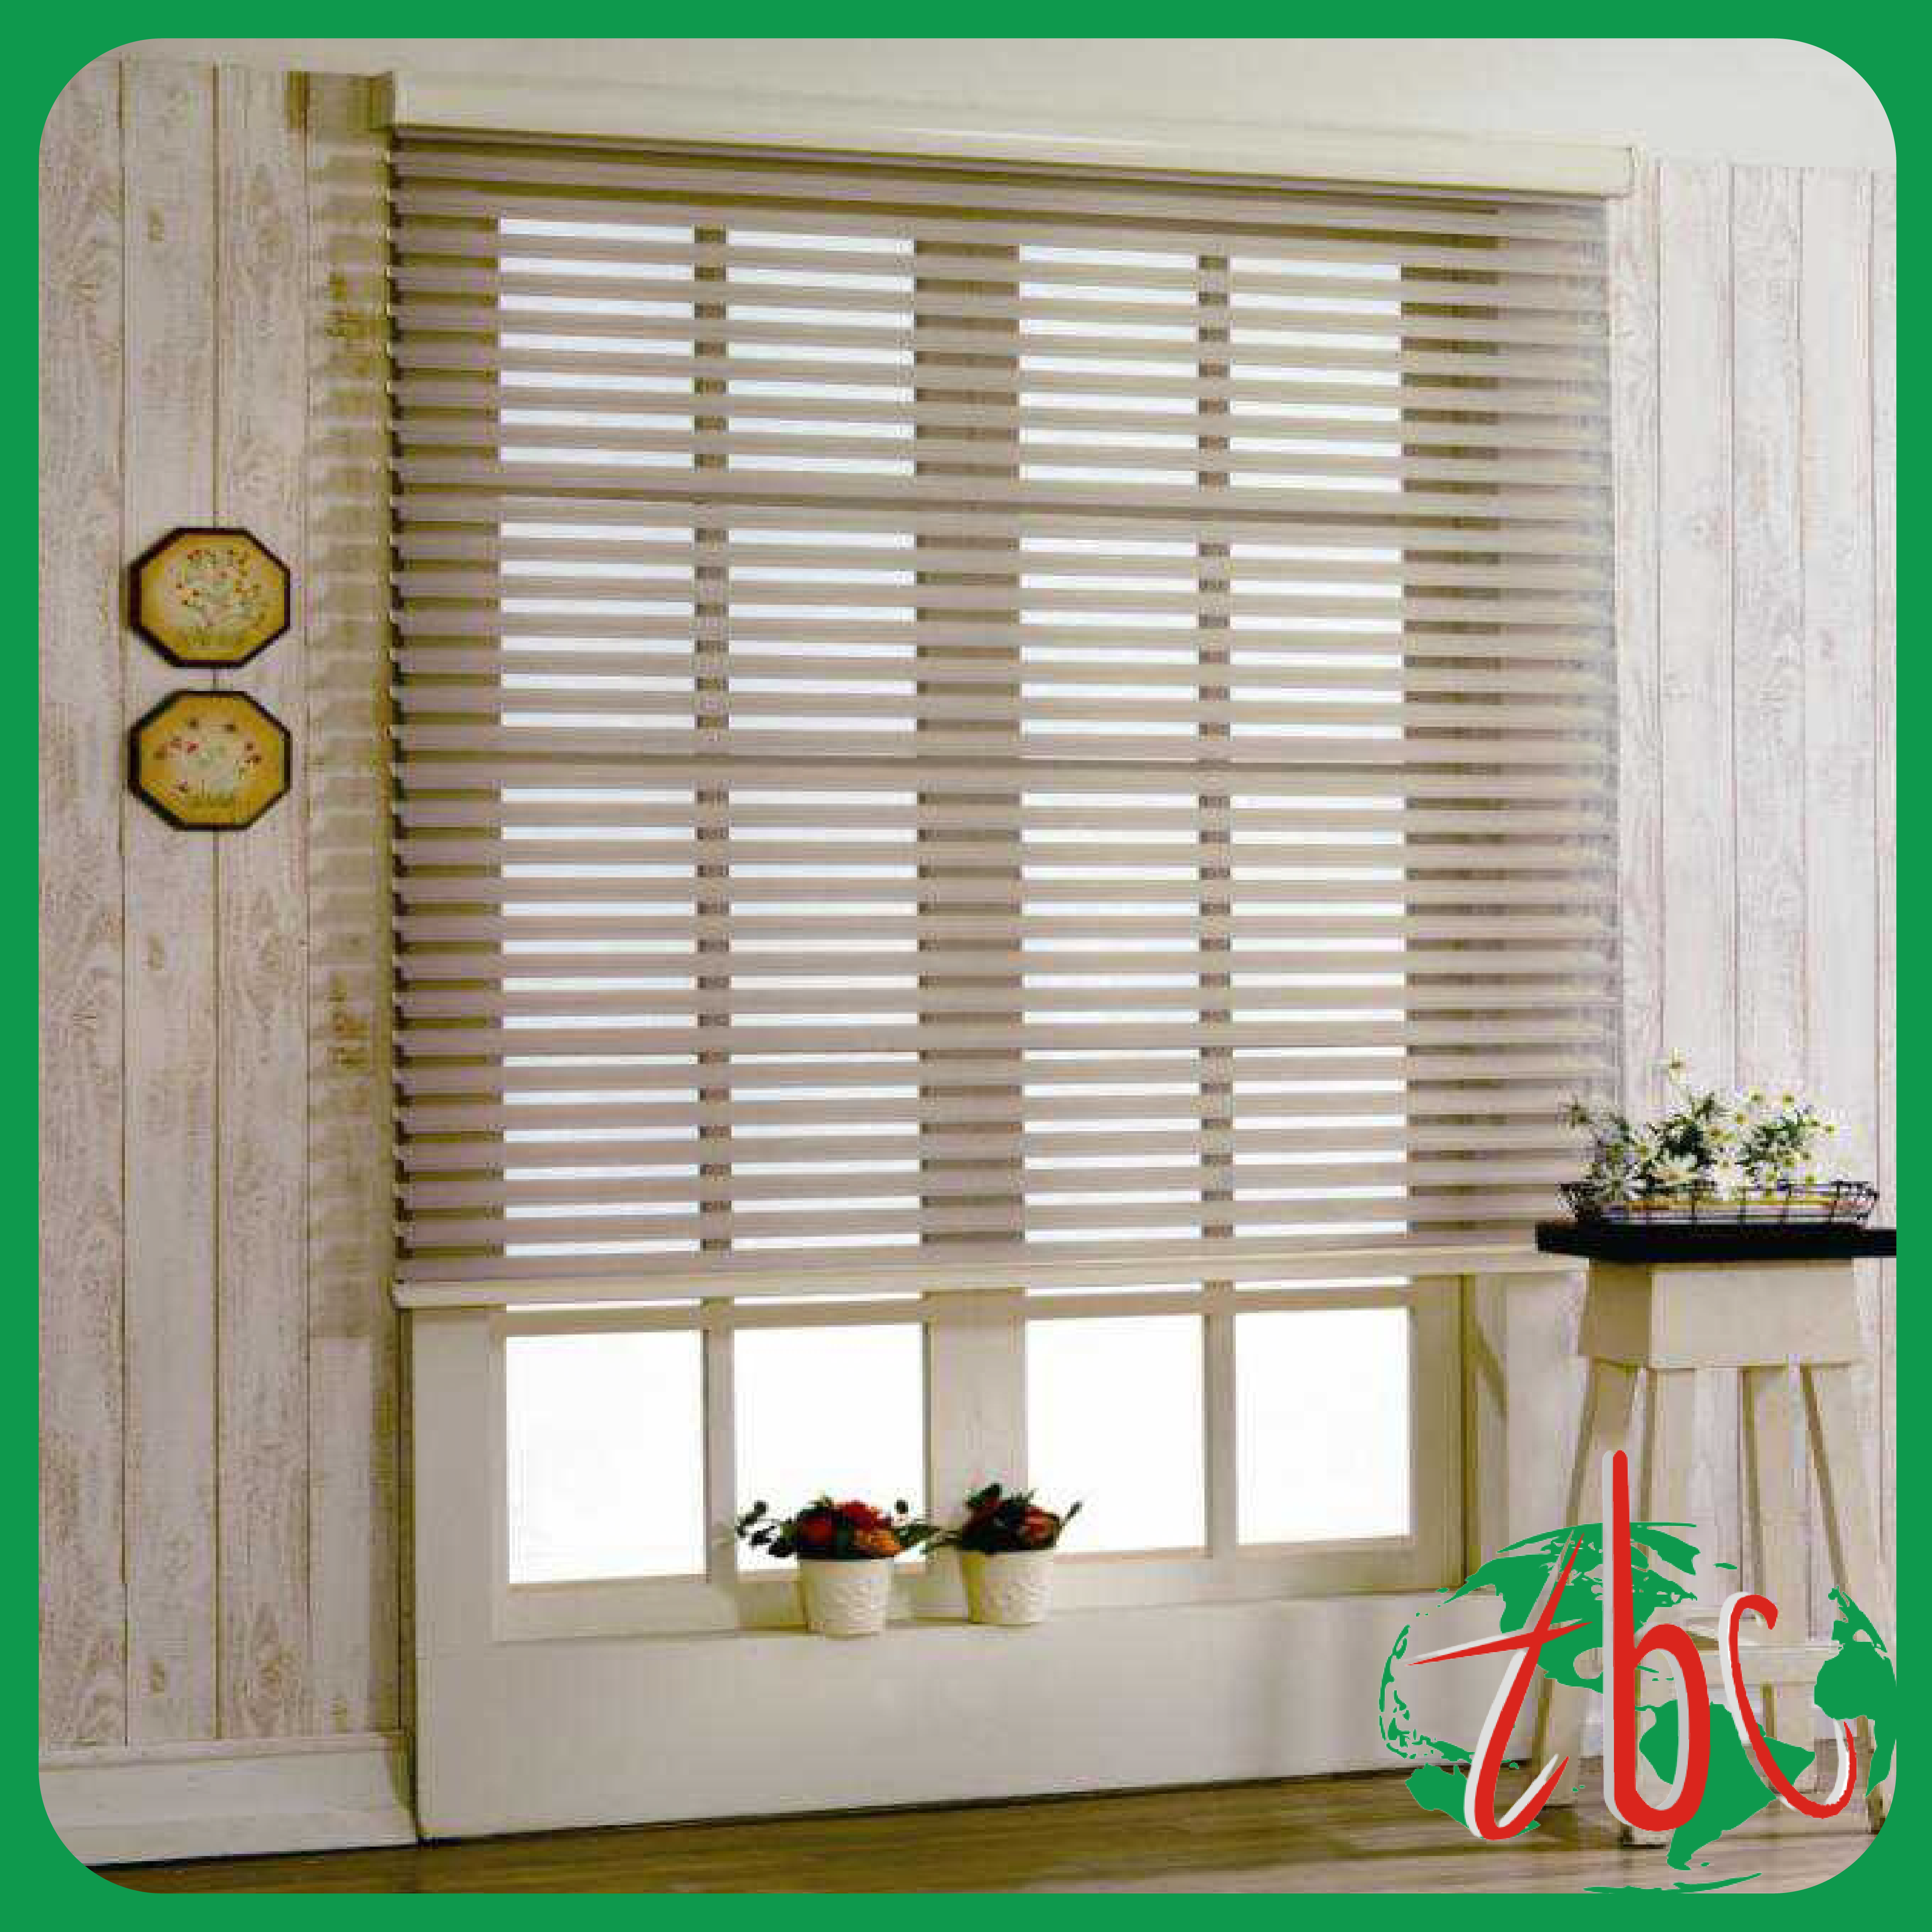 China Electric Motorized Jacquard Design Zebra Shutters Blinds For Blinds  Window Blind Roller And Shutters Blinds Curtains Blinds Blinder For Room  factory and manufacturers